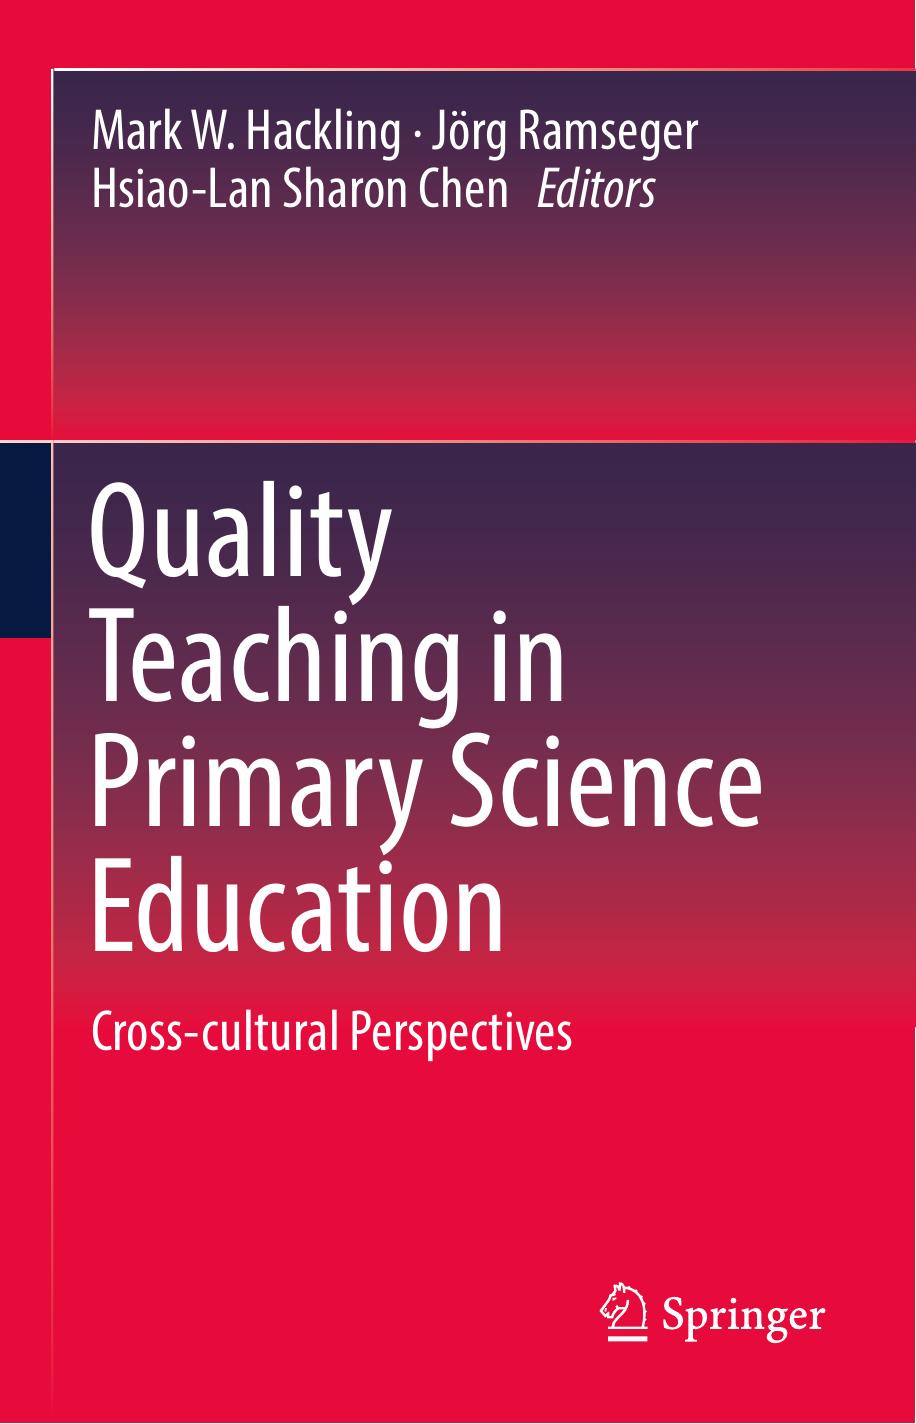 Quality Teaching in Primary Science Education  Cross-cultural Perspectives 2017.pdf